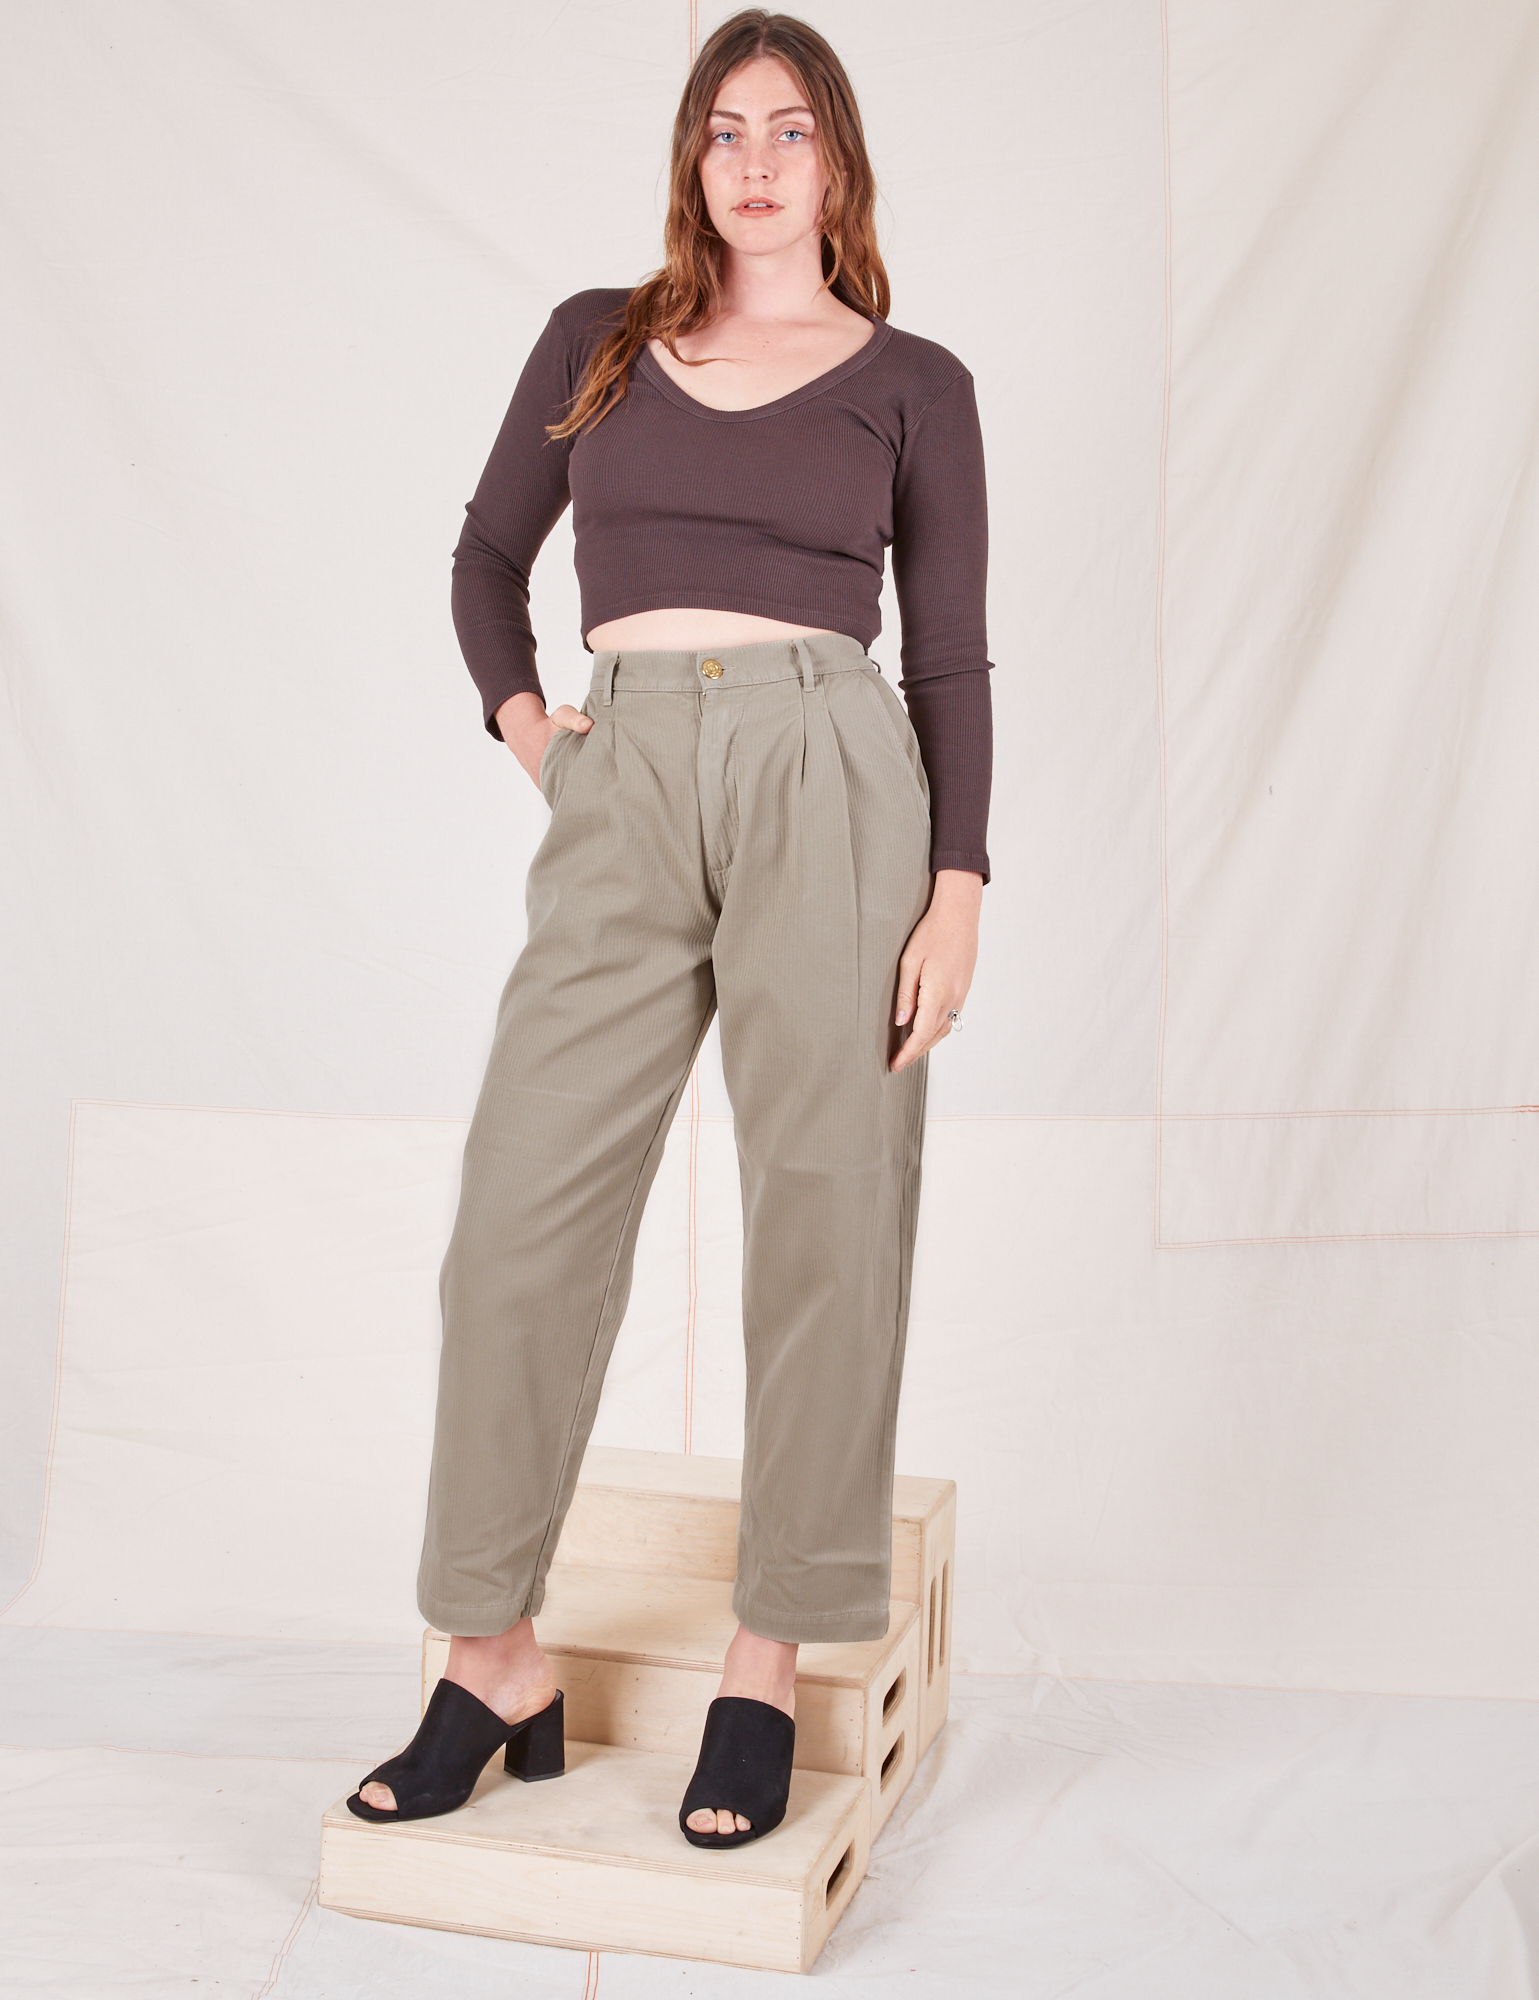 Allison is 5&#39;10&quot; and wearing S Heritage Trousers in Khaki Grey paired with espresso brown Long Sleeve V-Neck Tee